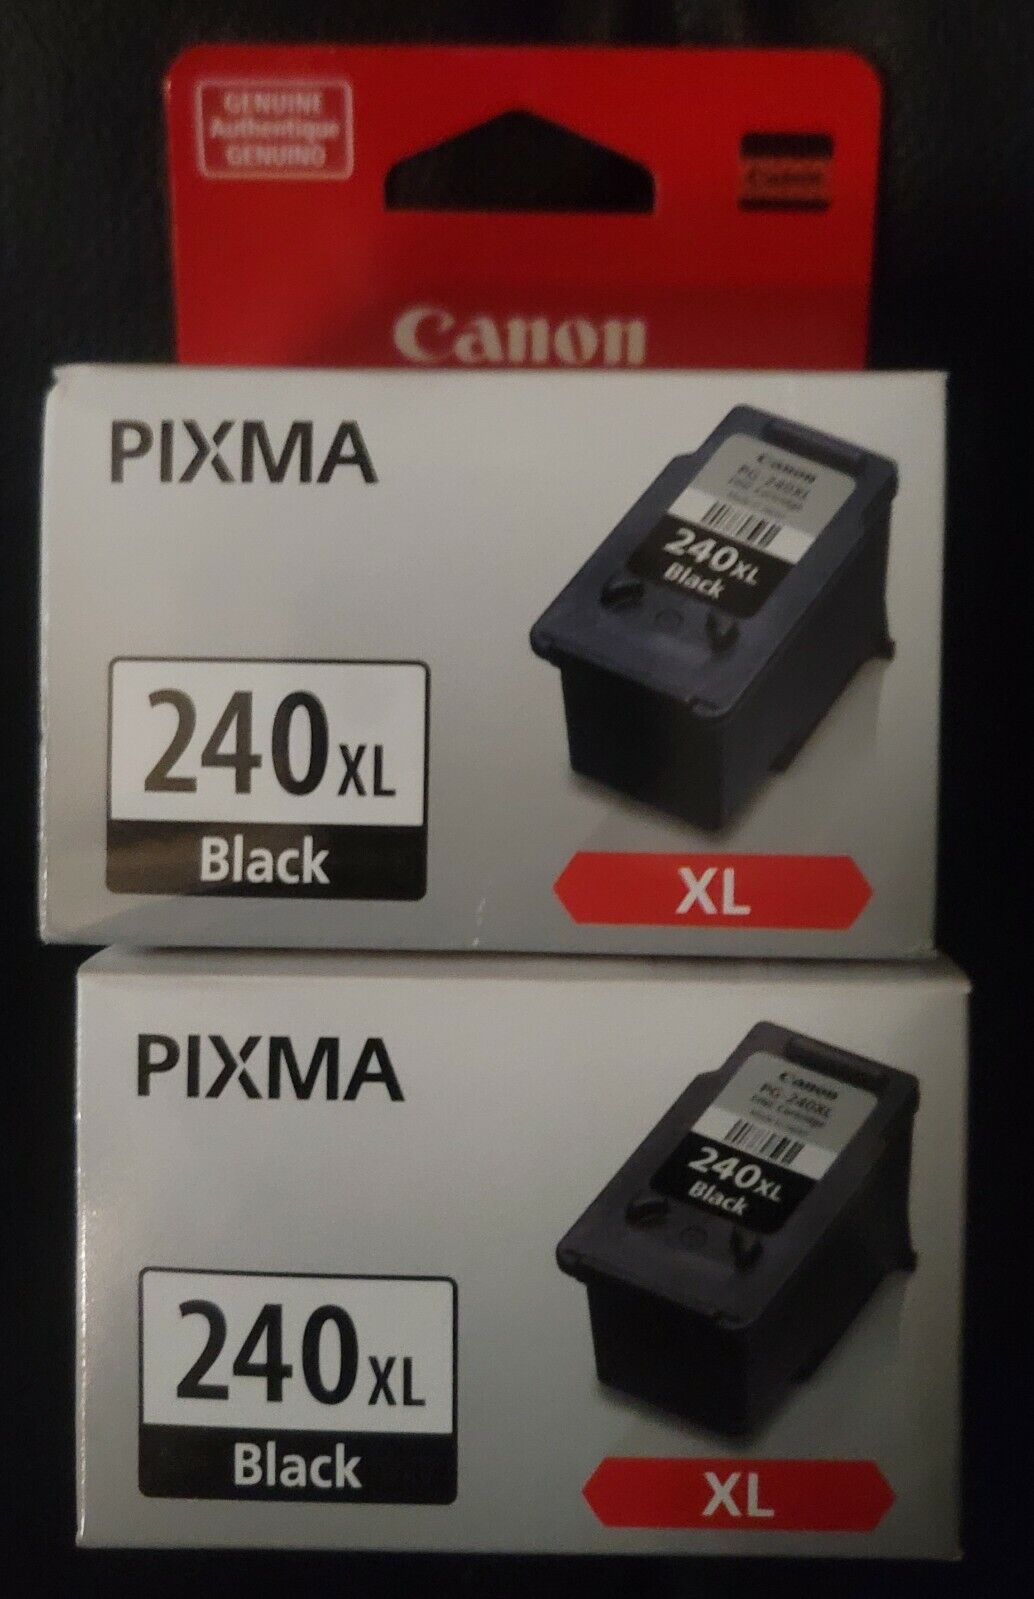 NEW CANON PIXMA Ink CARTRIDGE, (2-Pack) 240XL Black, Free Shipping Canon 240XL